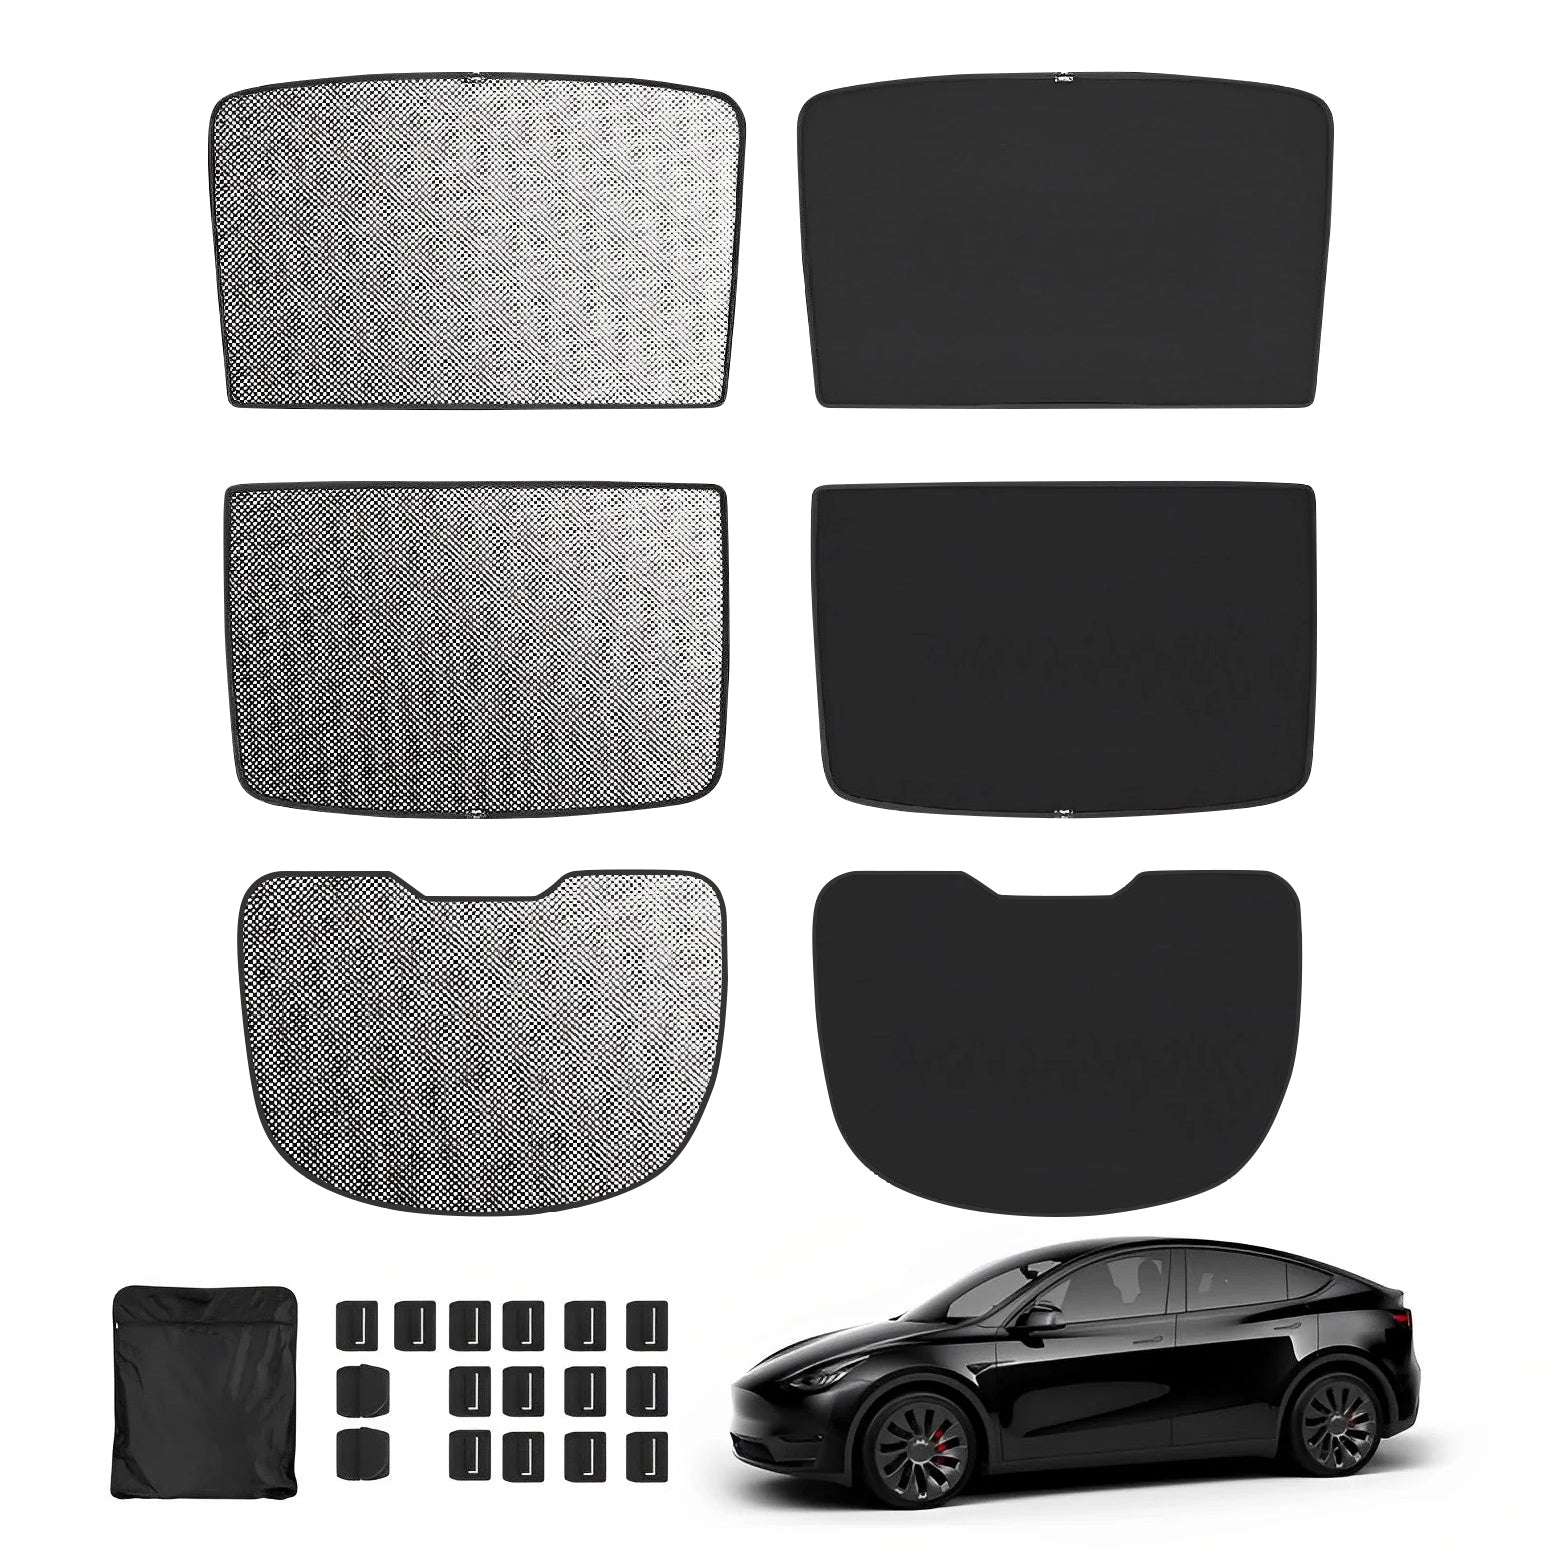 2023 Upgrade Built-In Reflective Sunroof and Rear Windshield Sunshade For Model Y / Model 3 - Lightweight Reflective Silver Coated Sun Visor